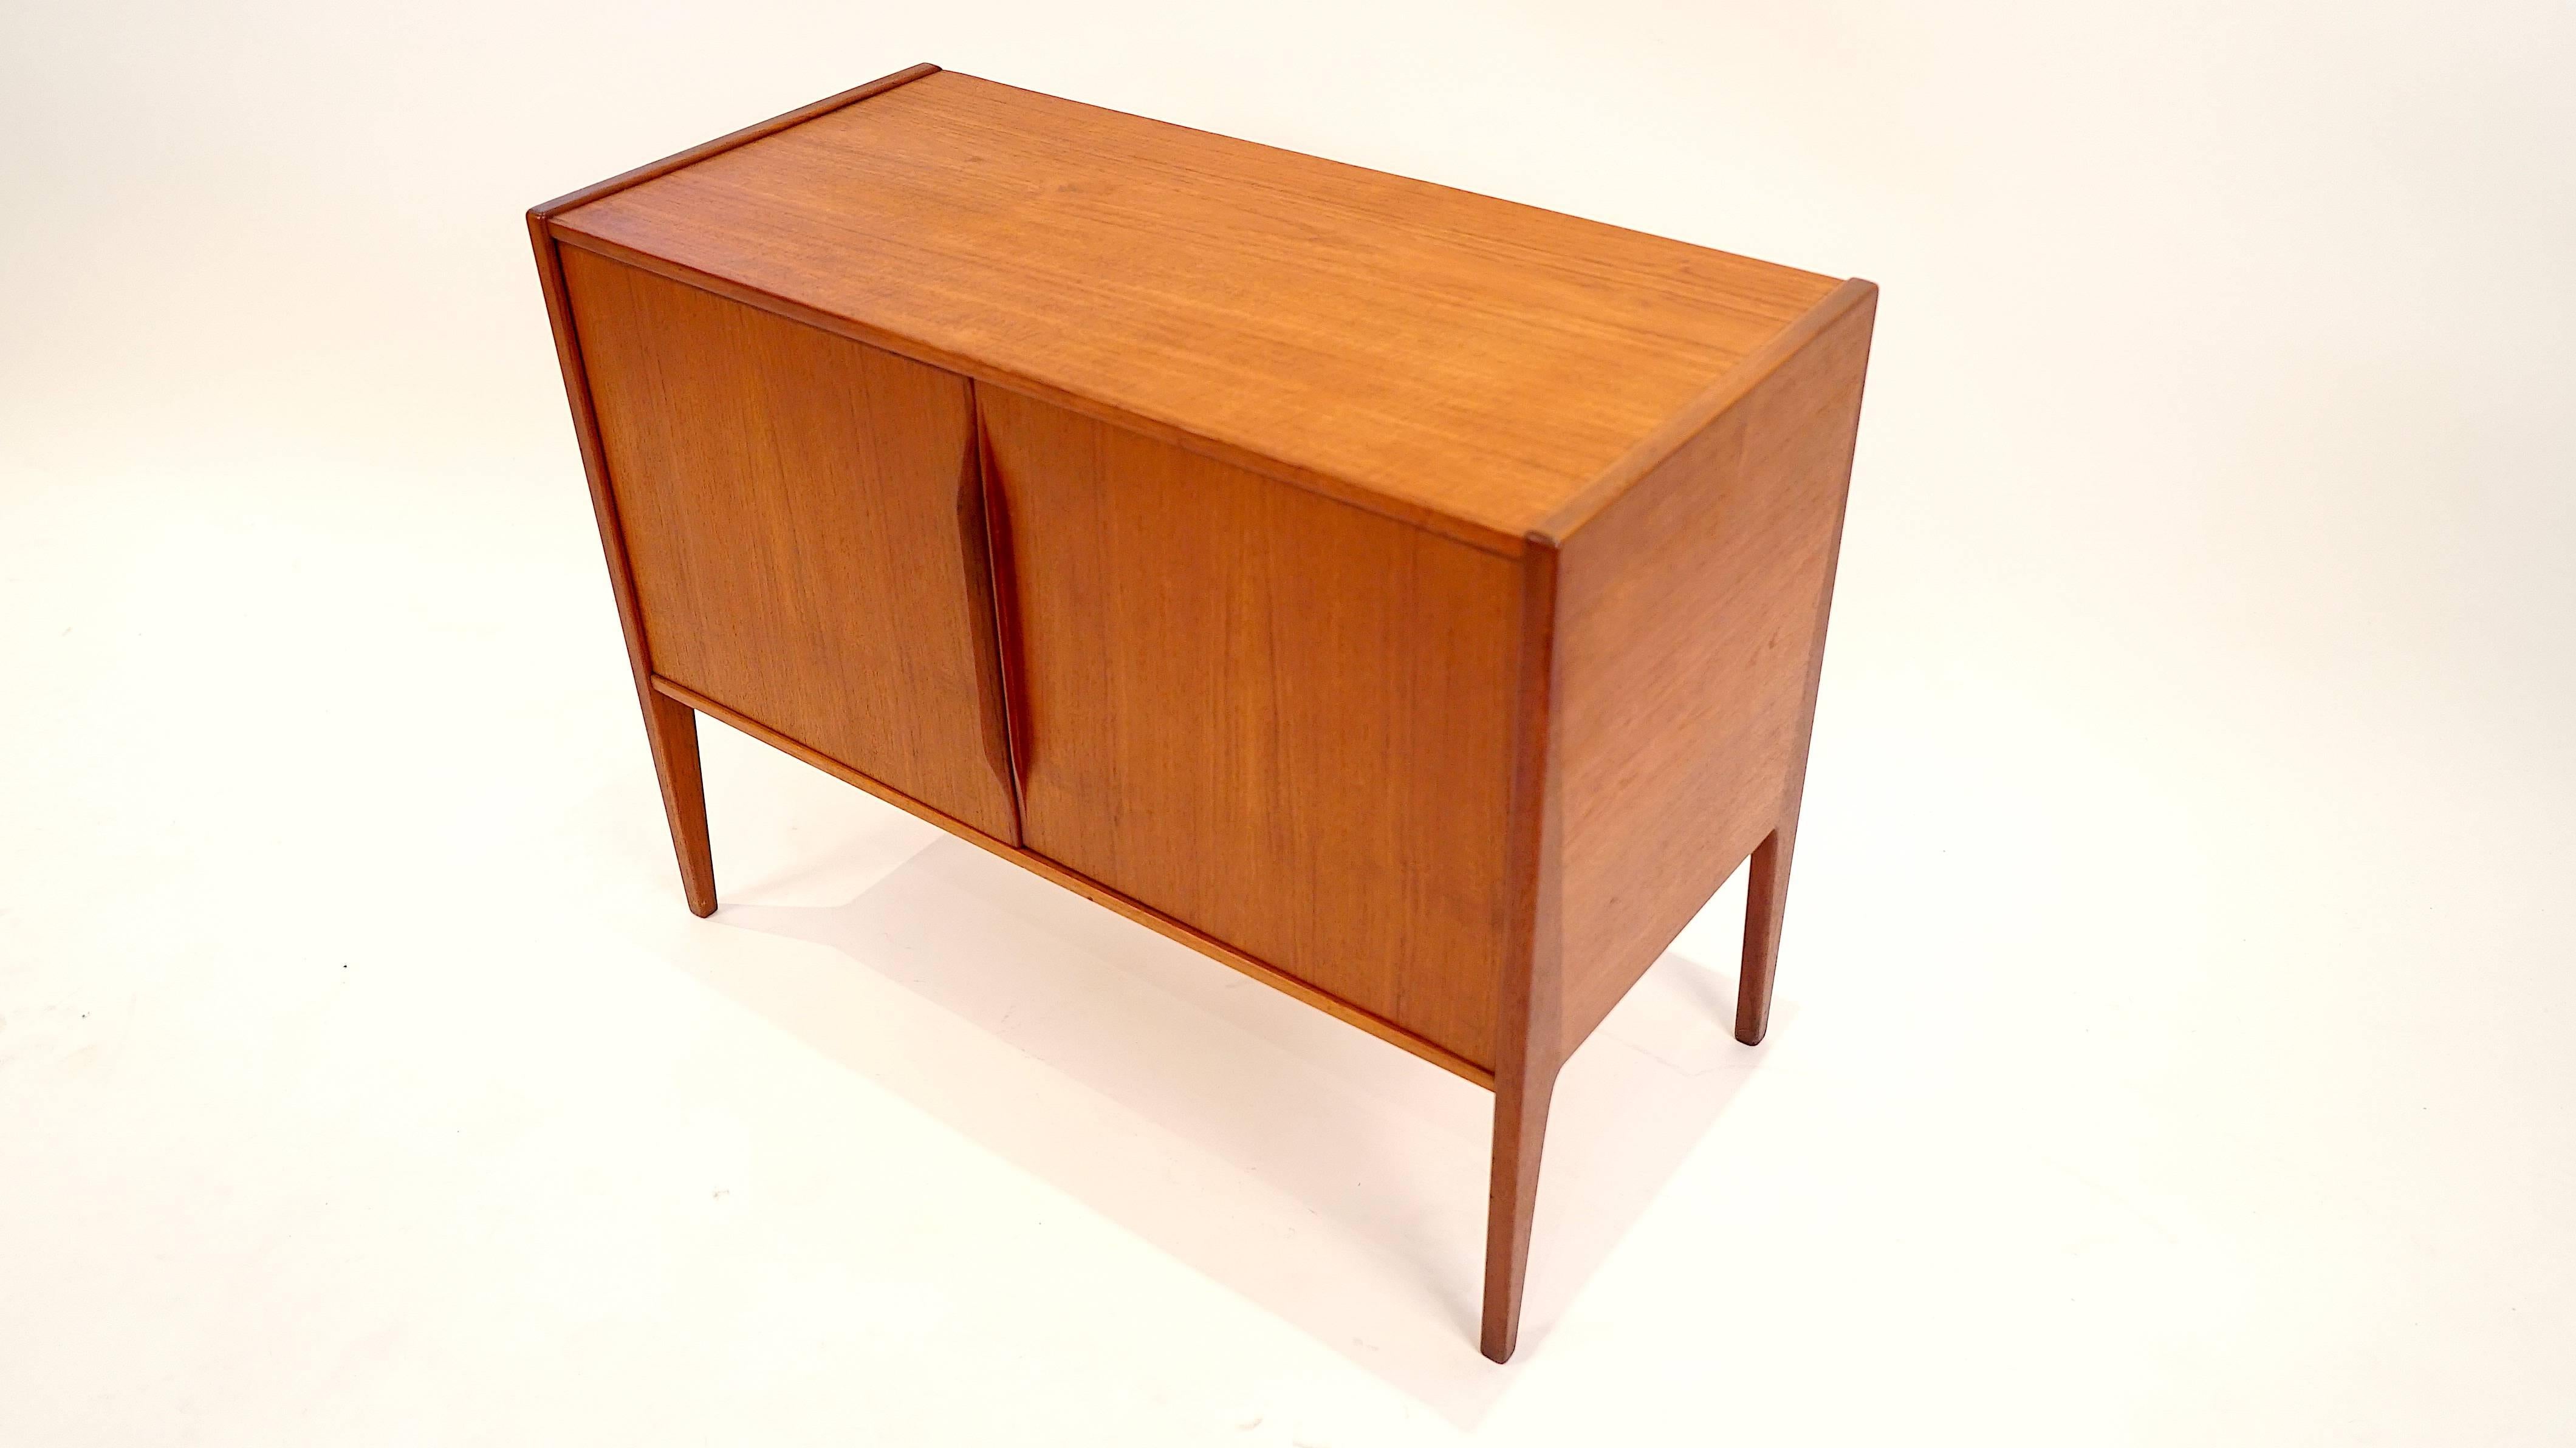 Danish demi credenza with signature Nils Jonsson legs featuring two tone teak construction. Contoured door pulls accent the front and give way to storage space inside. Brass hardware and beautifully figured wood round out the design. This diminutive